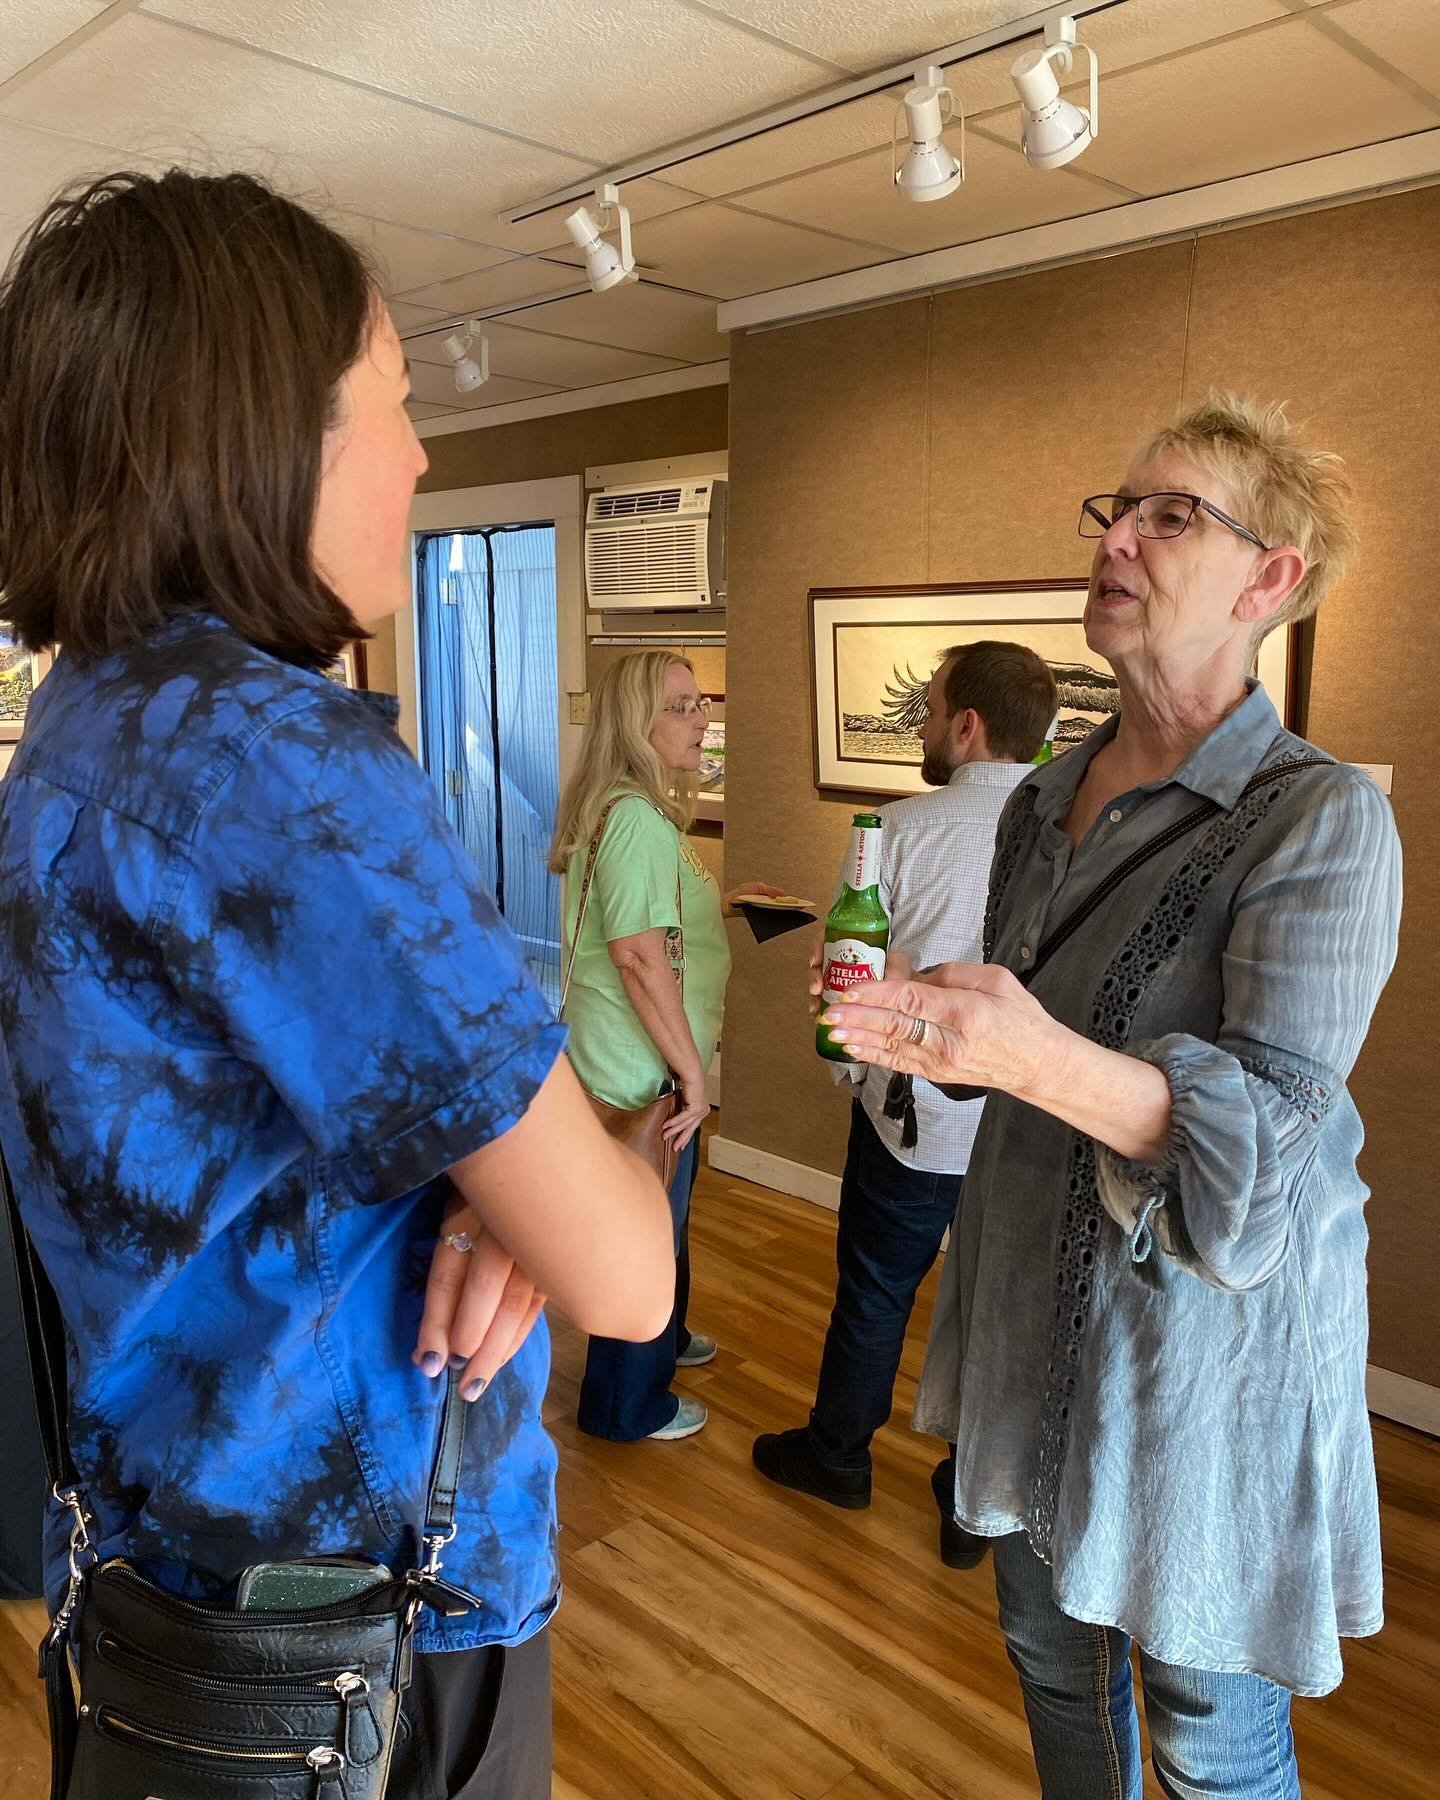 Thanks to everyone who celebrated our May exhibits and Third Friday kick off tonight. It was wonderful to see you all! Stephen Rengstorf and Susan Kirt exhibitions continue through this month. Stop in soon. 

#chestertonartcenter #visitchesterton #su